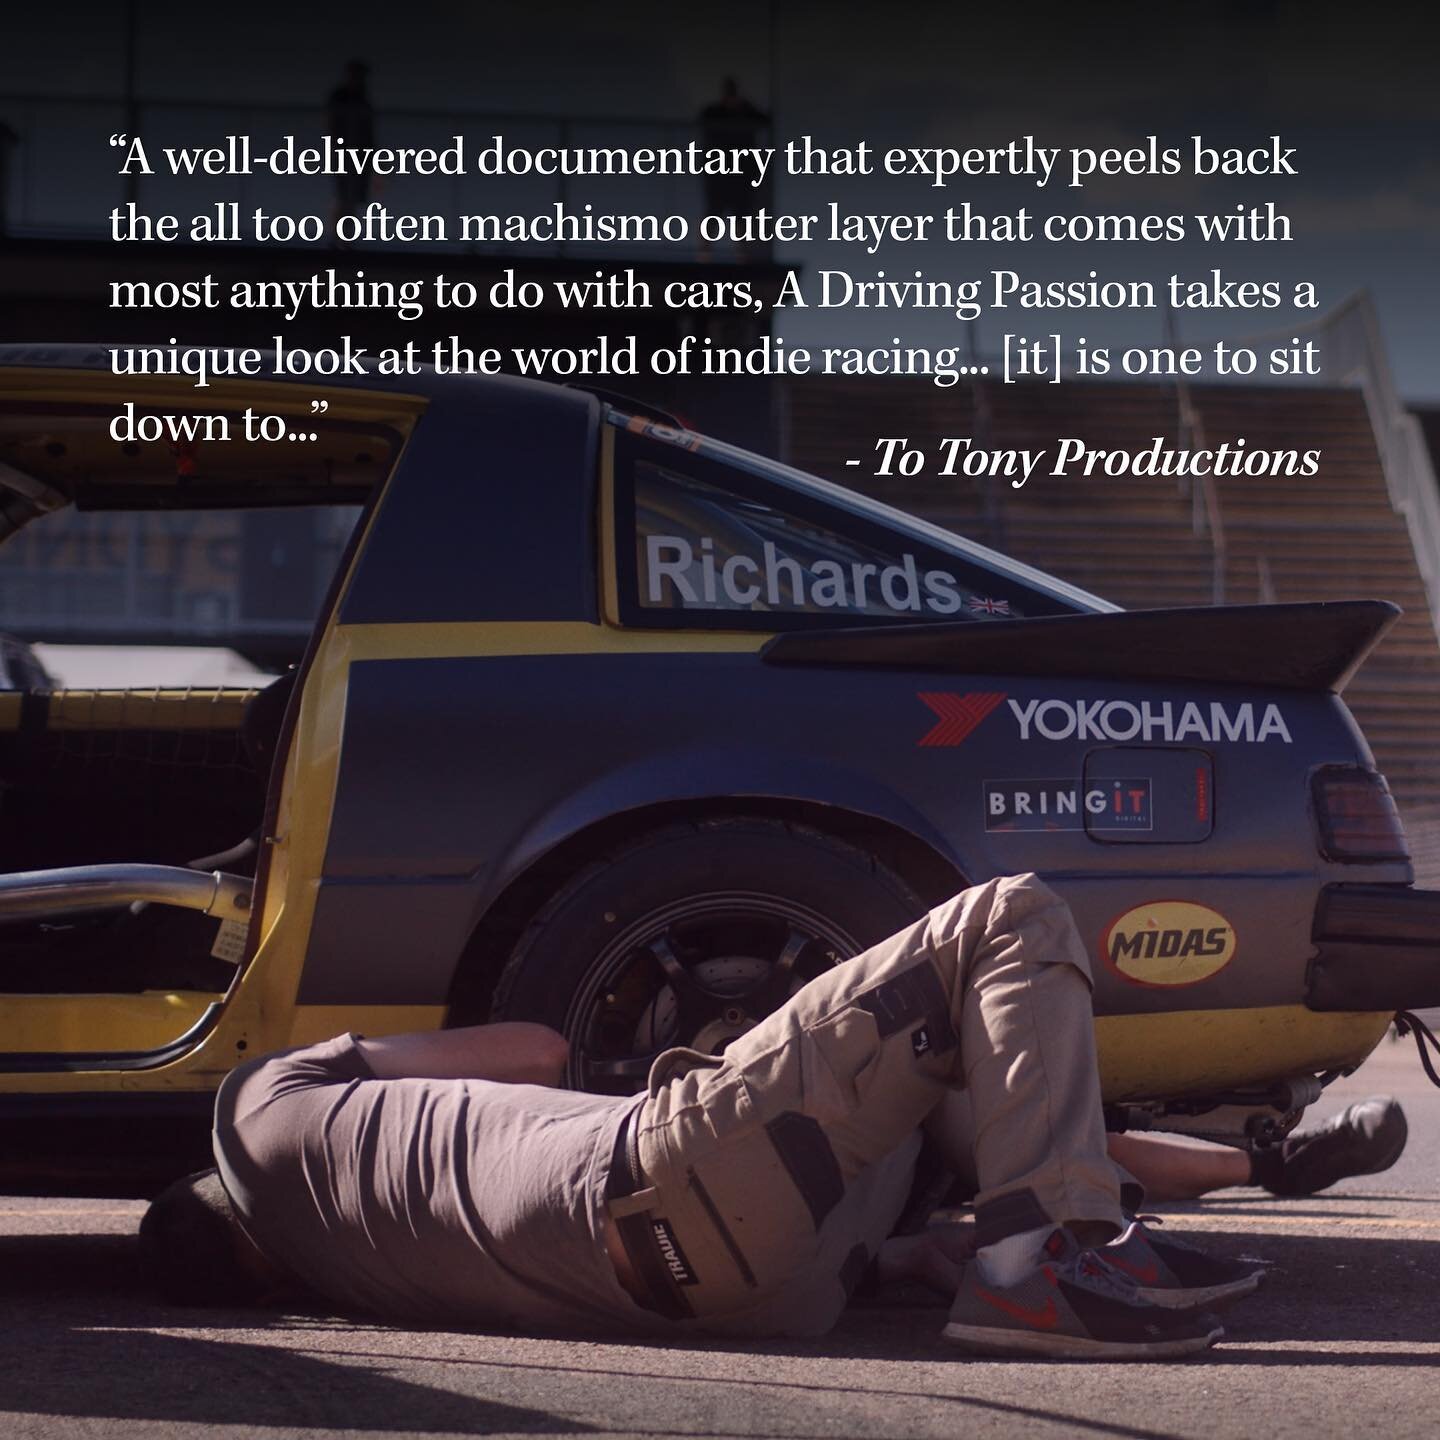 Here's a snippet from an awesome review the brilliant folk at @totonyproductions wrote about A Driving Passion... they are honestly way too kind. Go check it out, link in bio!
.

#film #filmmaking #filmmaker #cinema #cinematography #cinematographer #